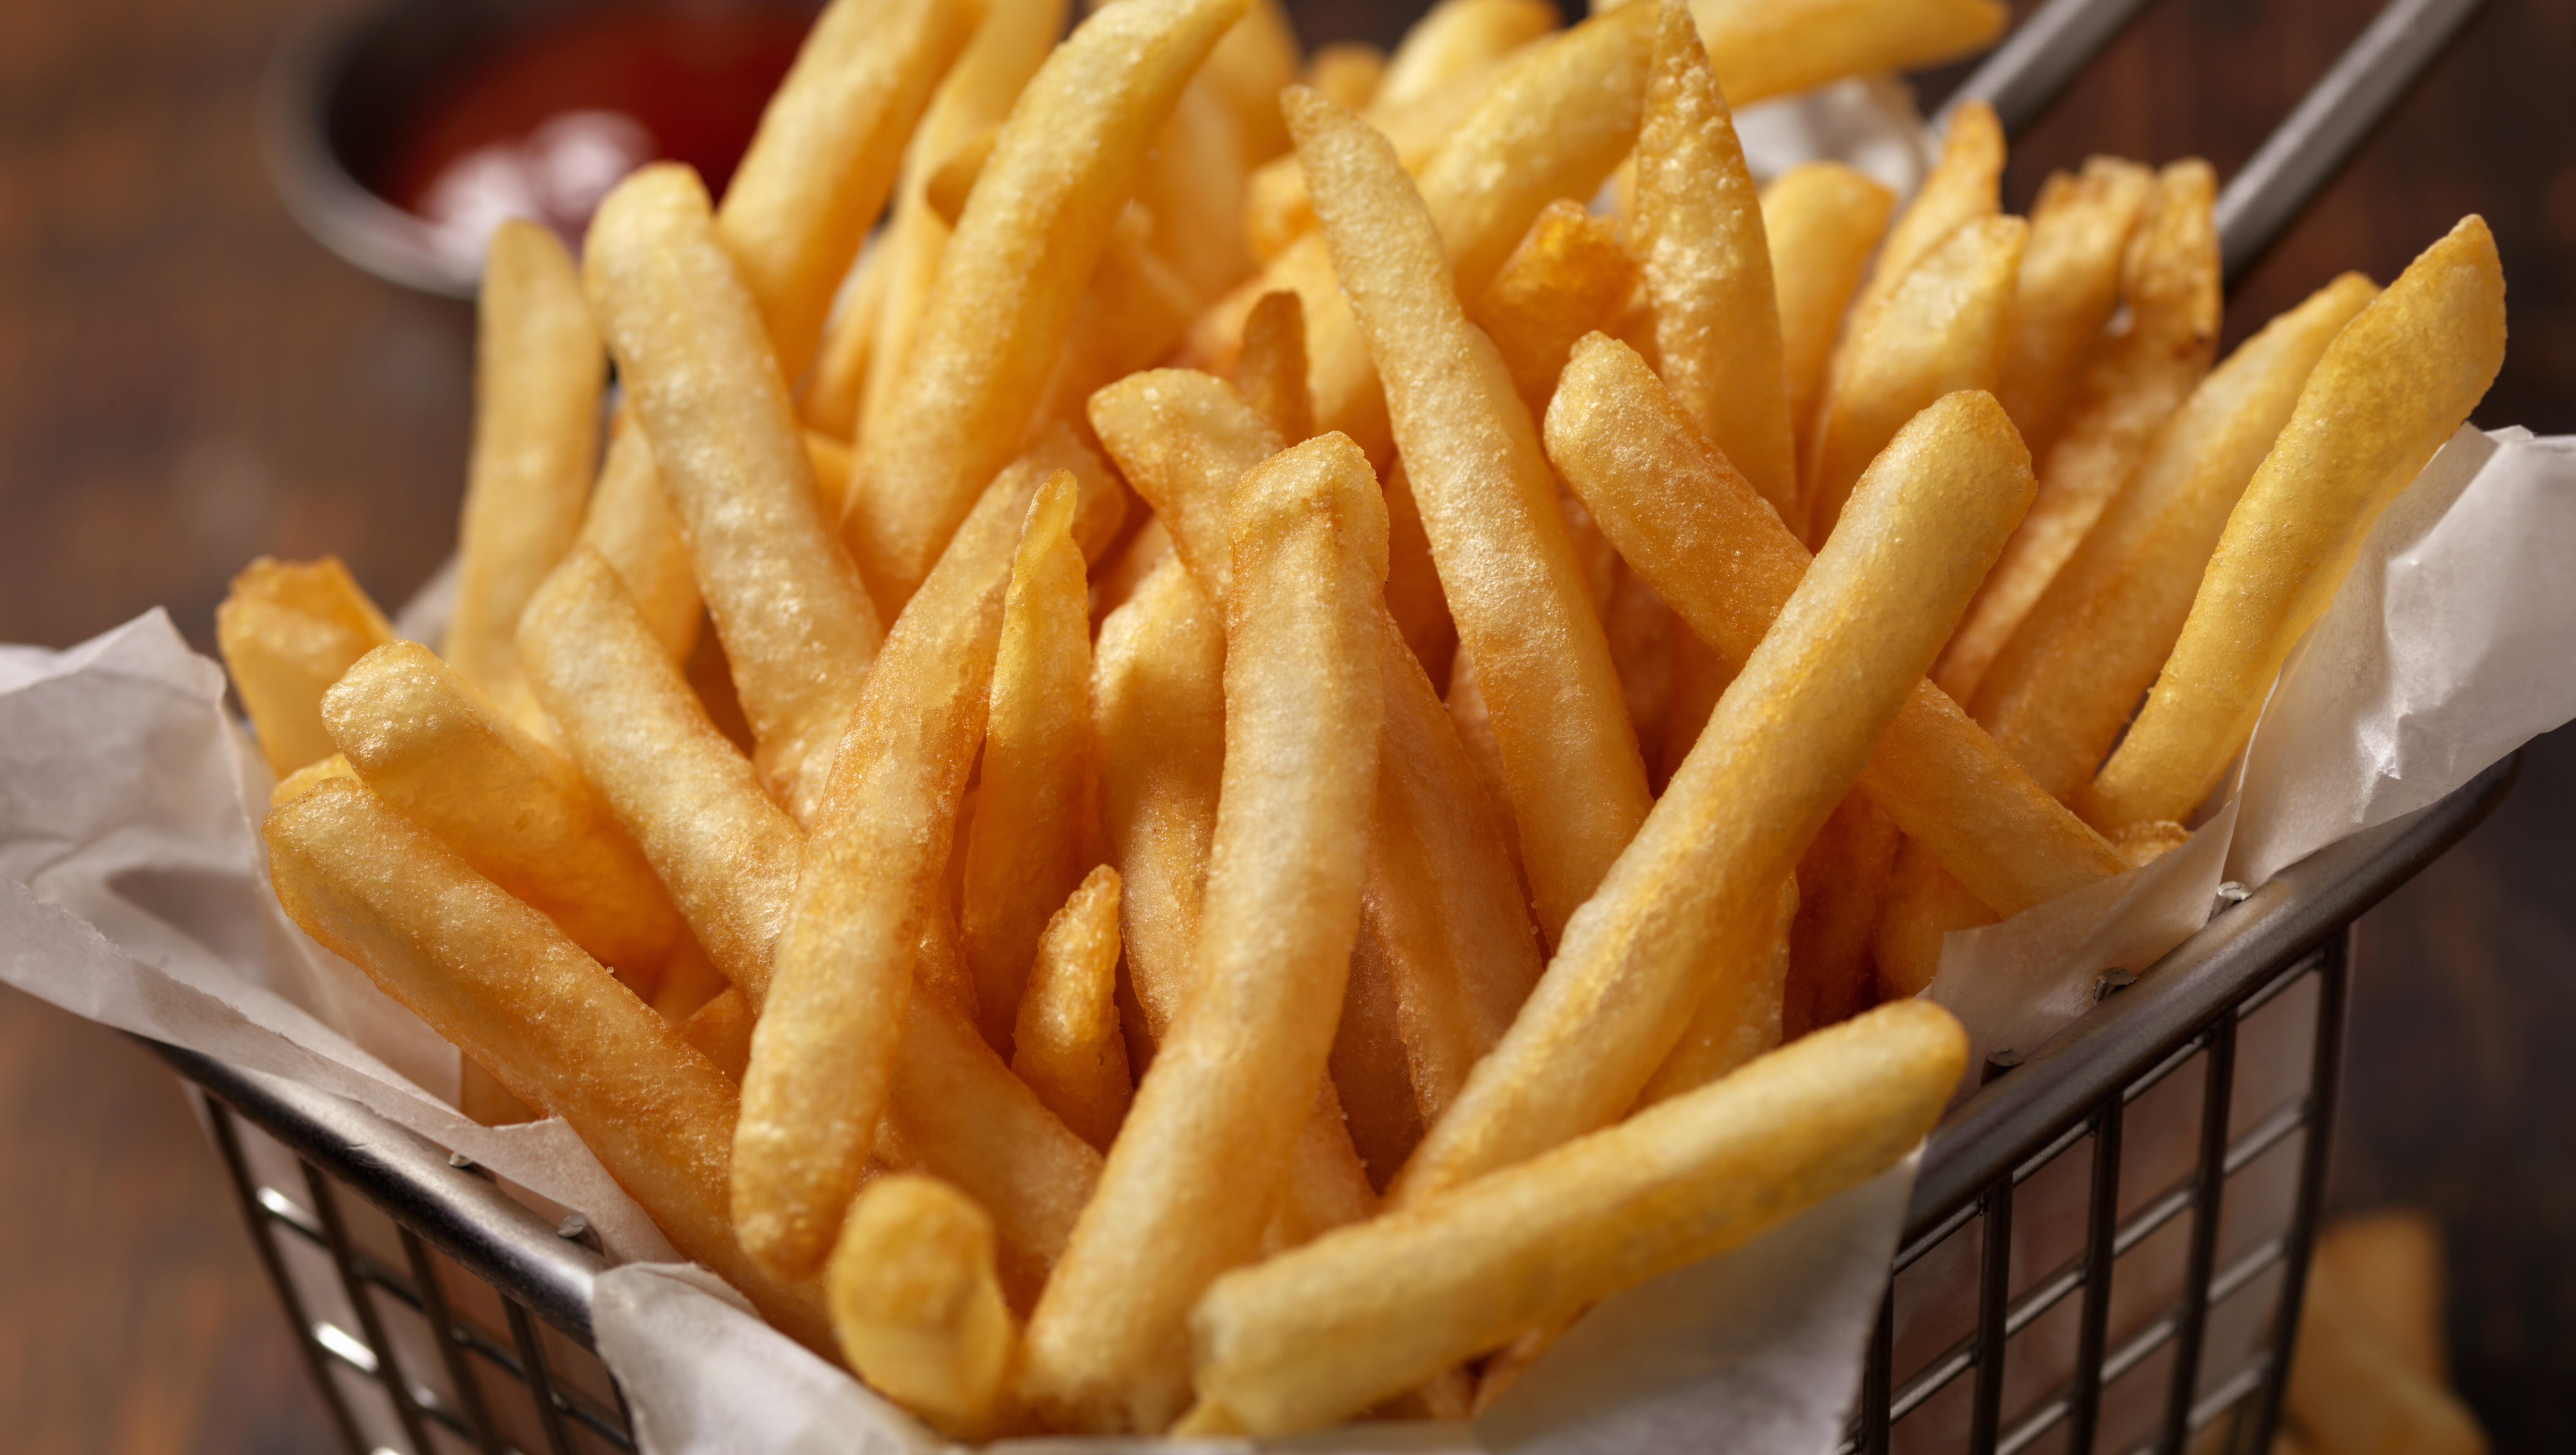 Tired of Always Using Ketchup? Here Are The Best Sauces for French Fries